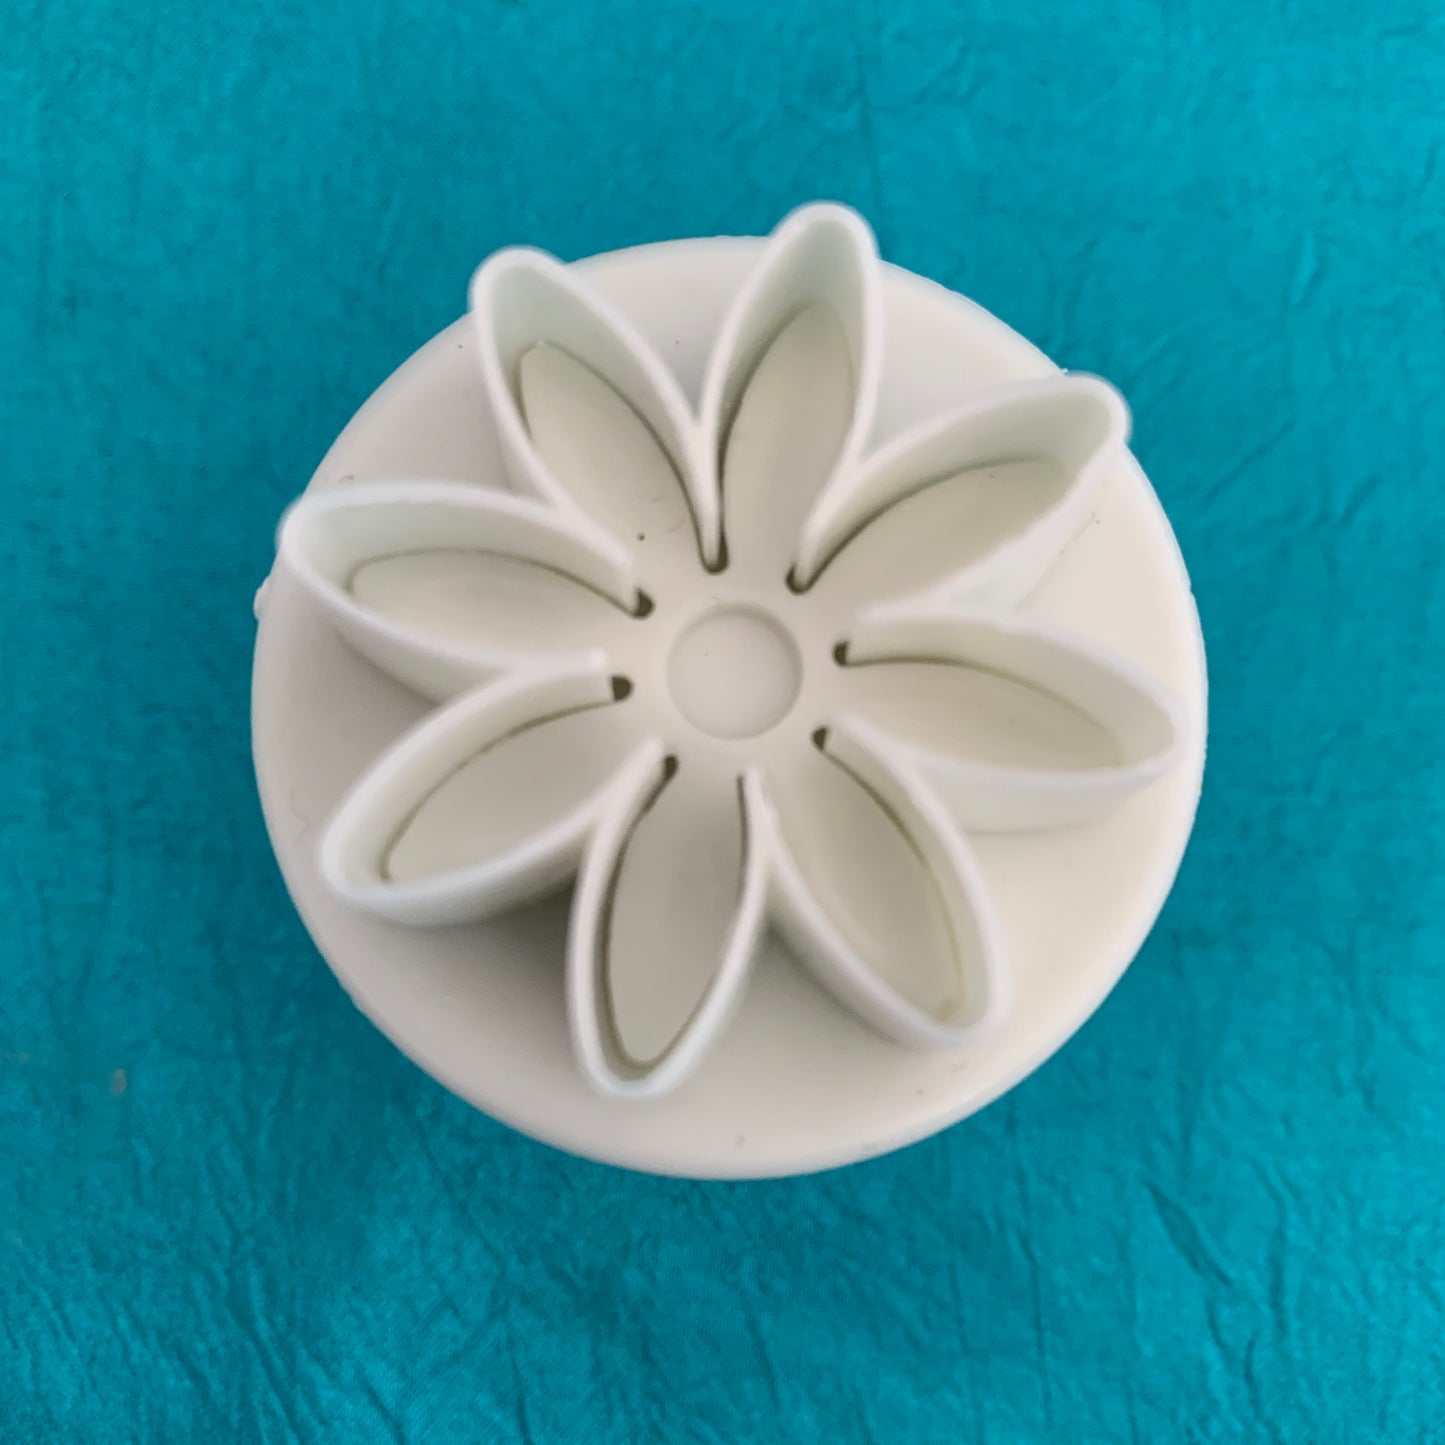 Daisy Plunger Cutters For Polymer Clay And More - Polymer Clay TV tutorial and supplies